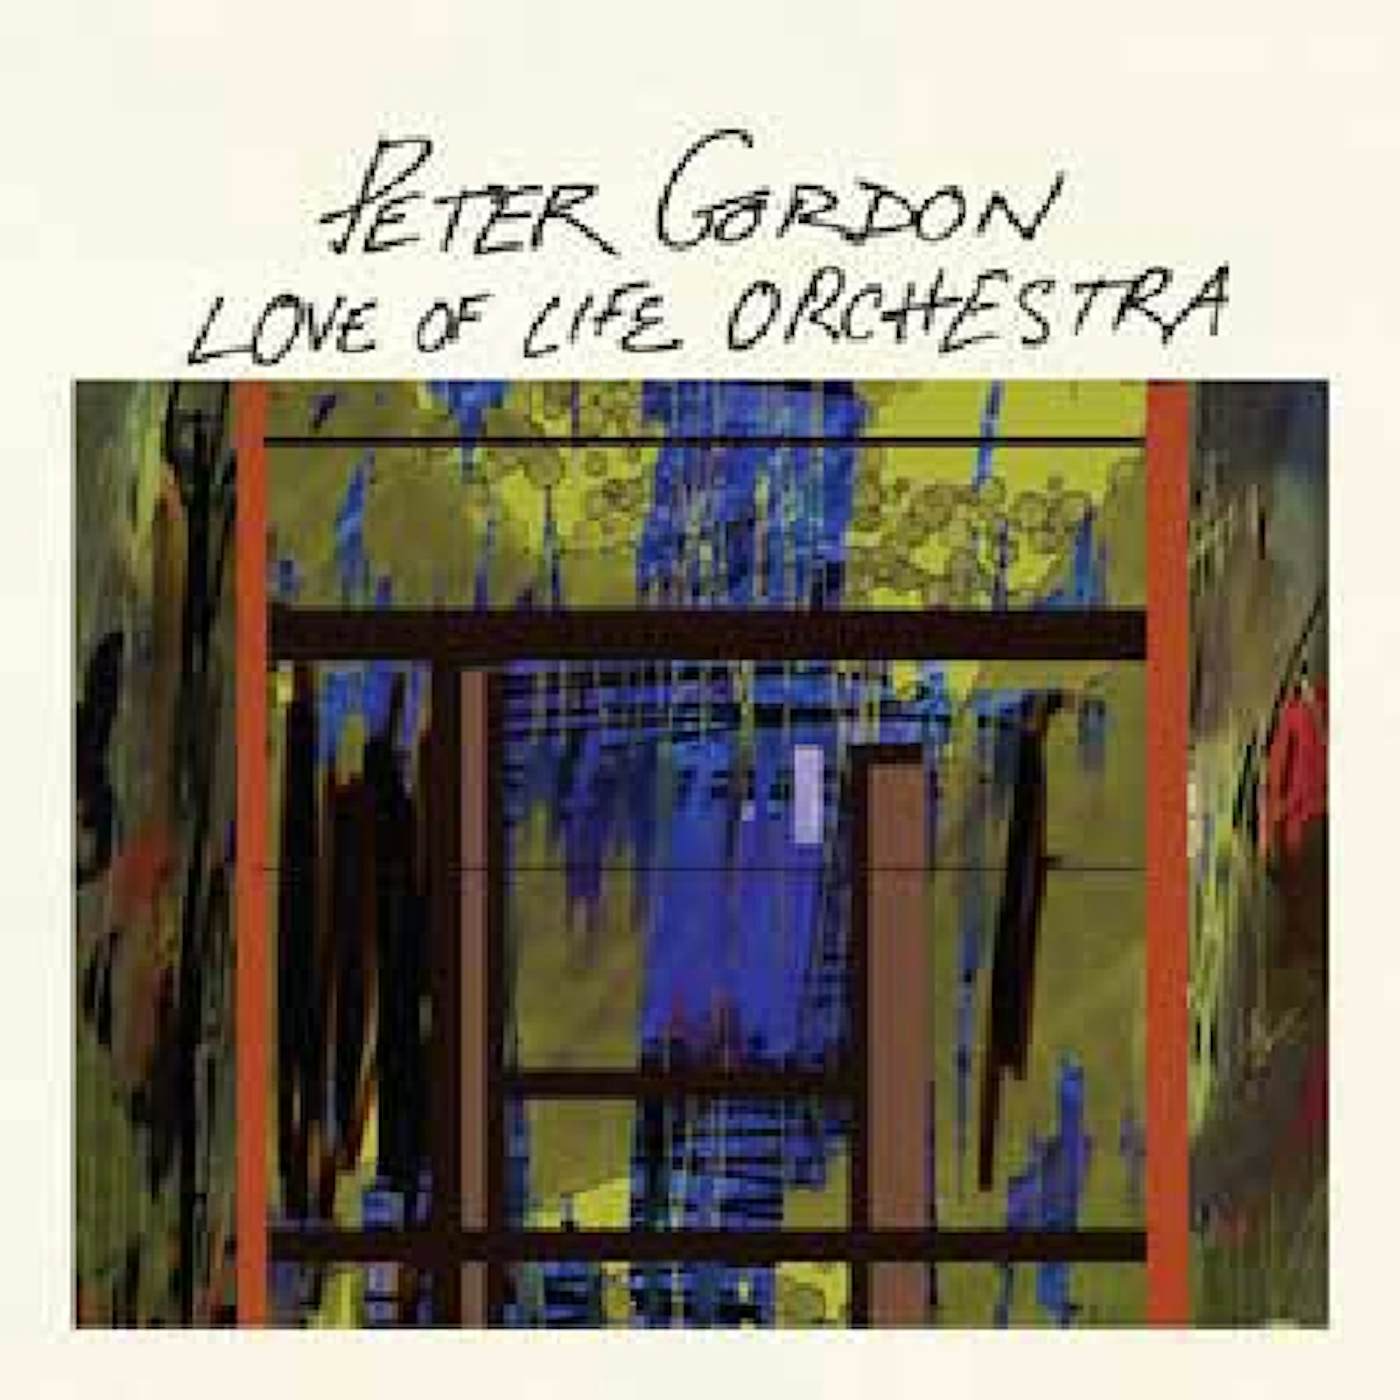 Peter Gordon & Love of Life Orchestra LOVE OF LIFE ORCHESTRA CD